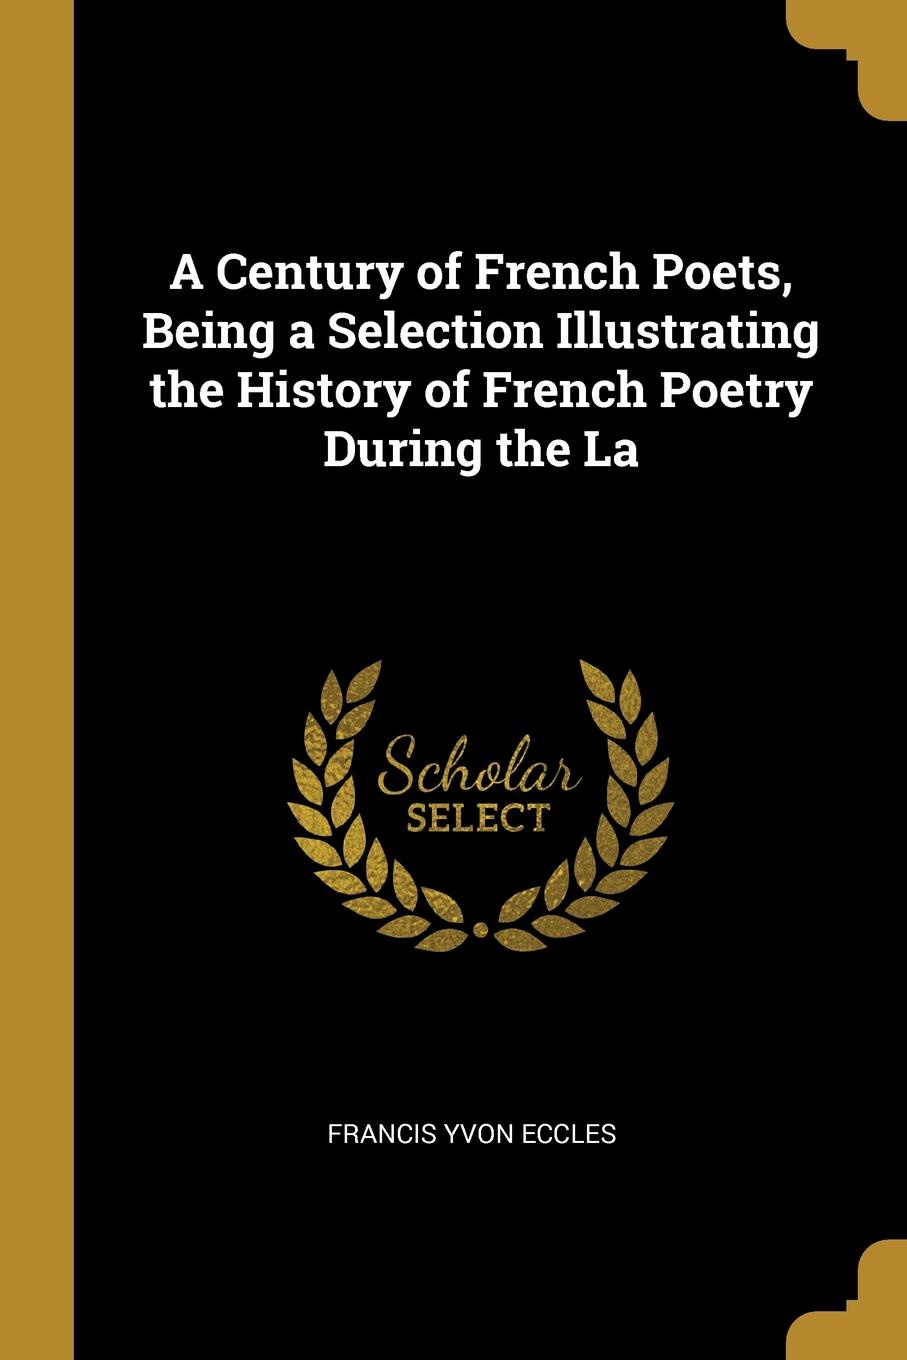 A Century of French Poets, Being a Selection Illustrating the History of French Poetry During the La